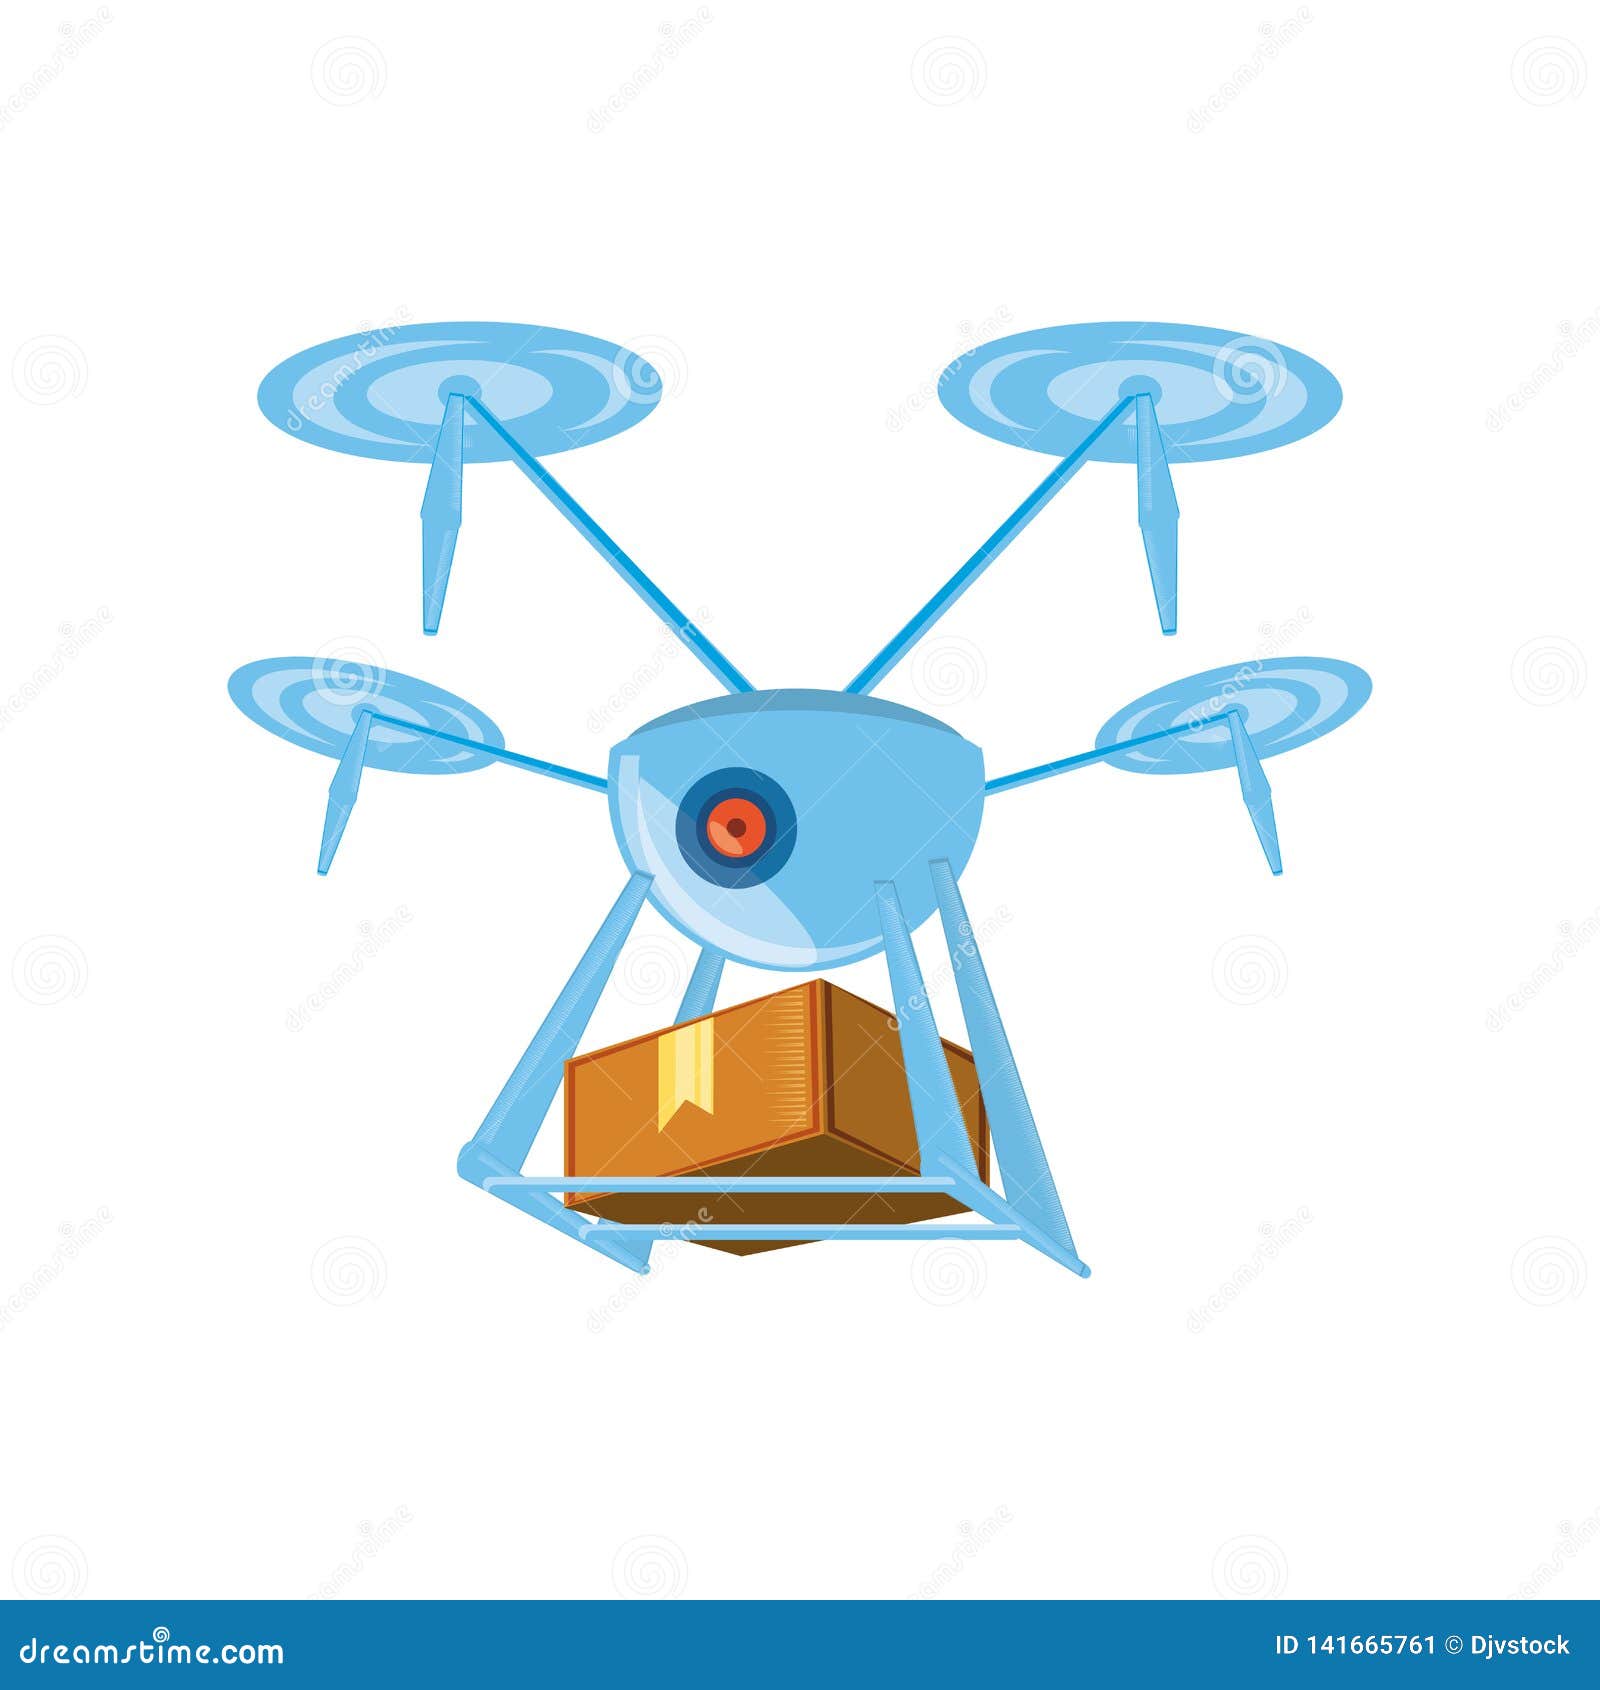 Drone Technology with Box Carton Stock Vector - Illustration of packet ...